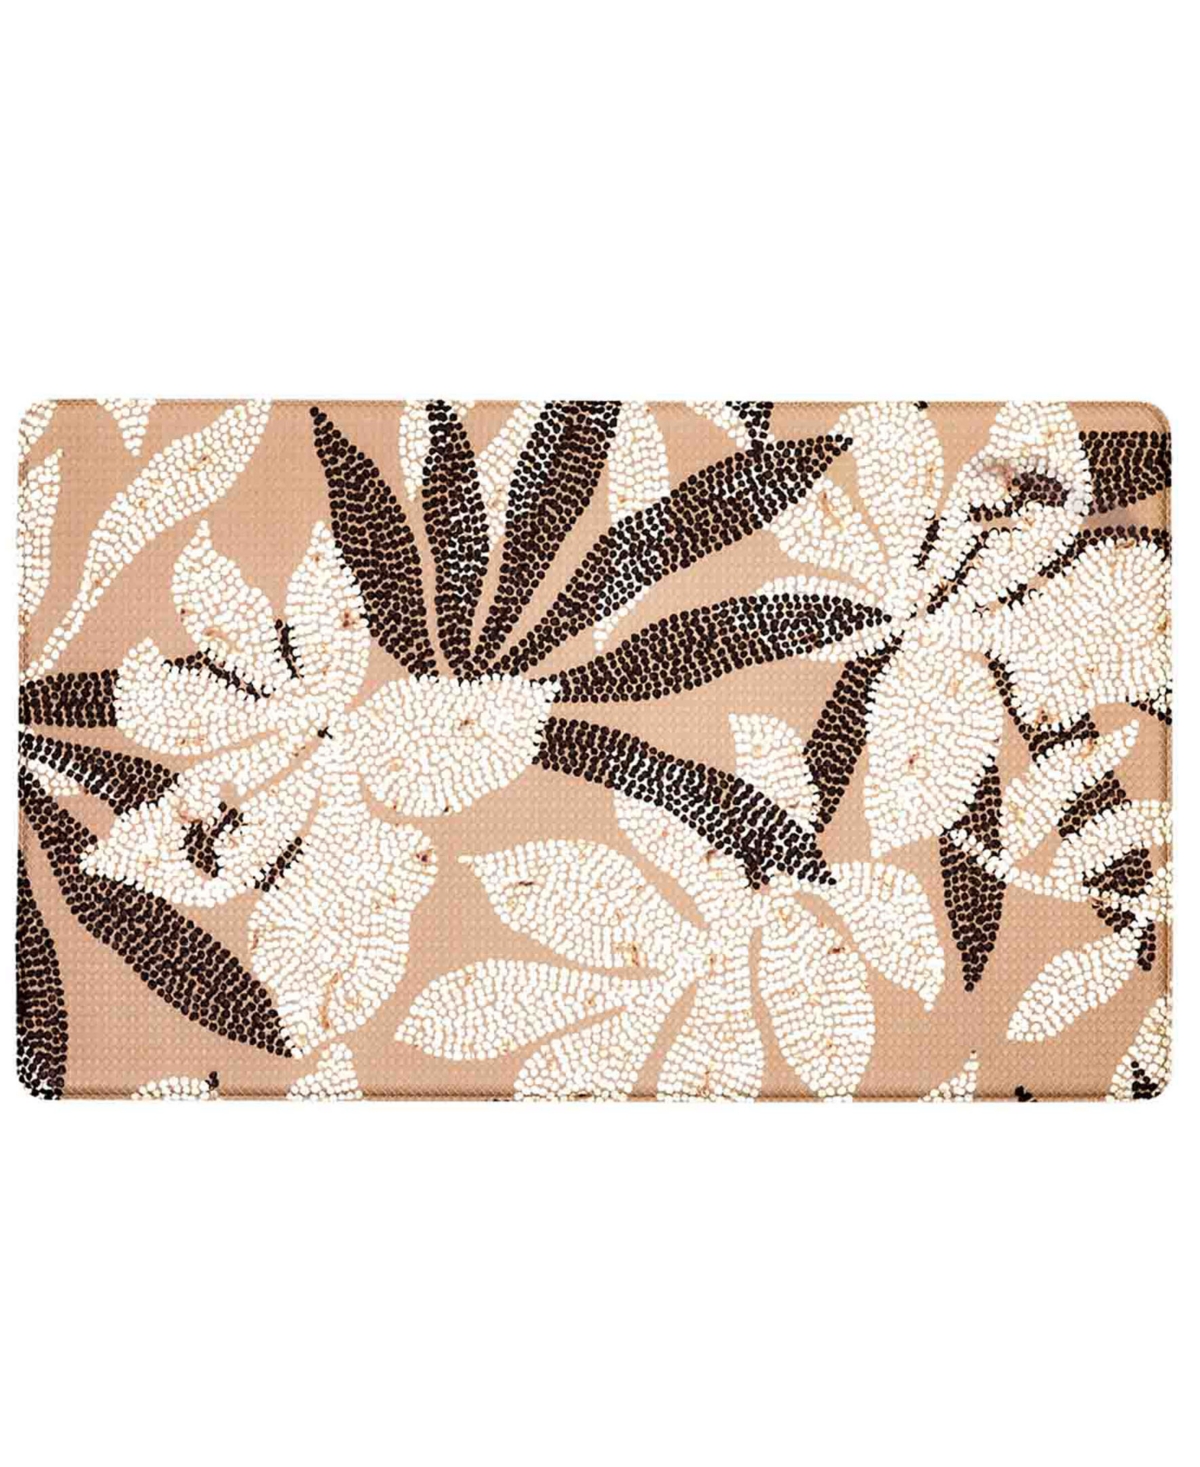 Tommy Bahama Printed Polyvinyl Chloride Fatigue-resistant Mat, 20" X 36" In Sand Flower Biege